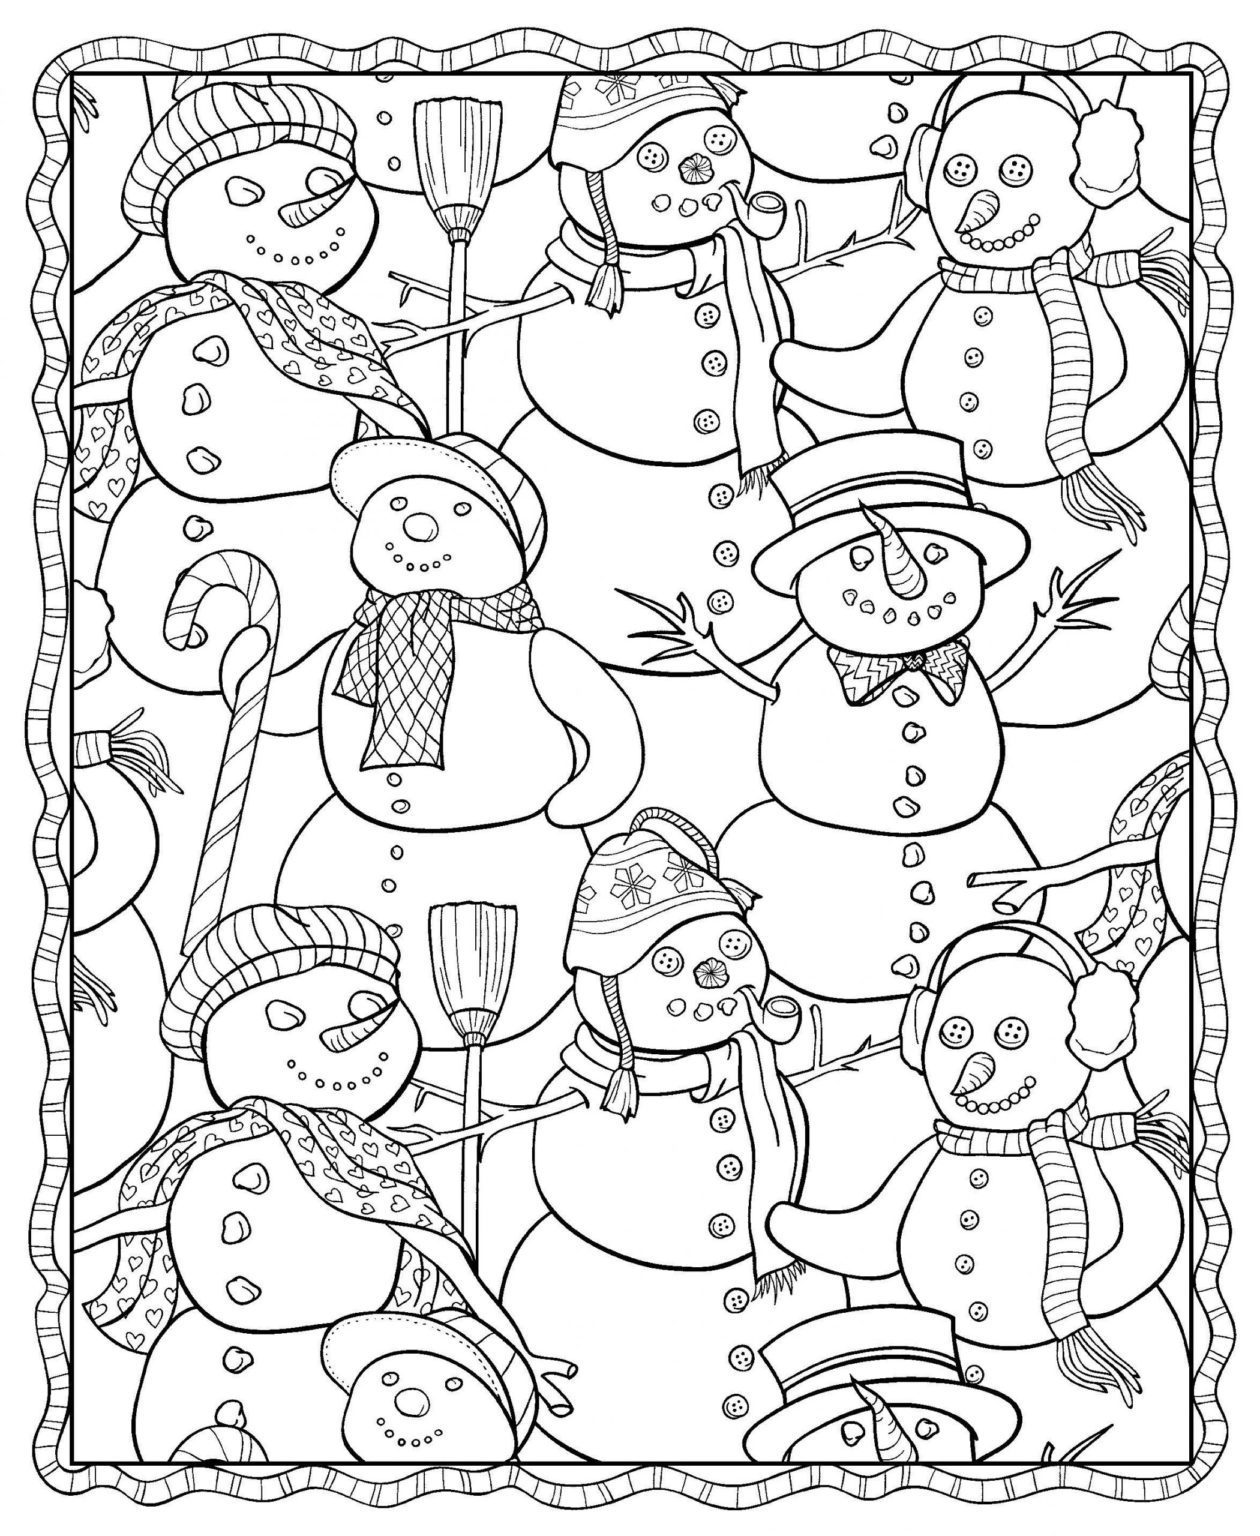 free-easy-winter-coloring-pages-for-adults-book-for-kids